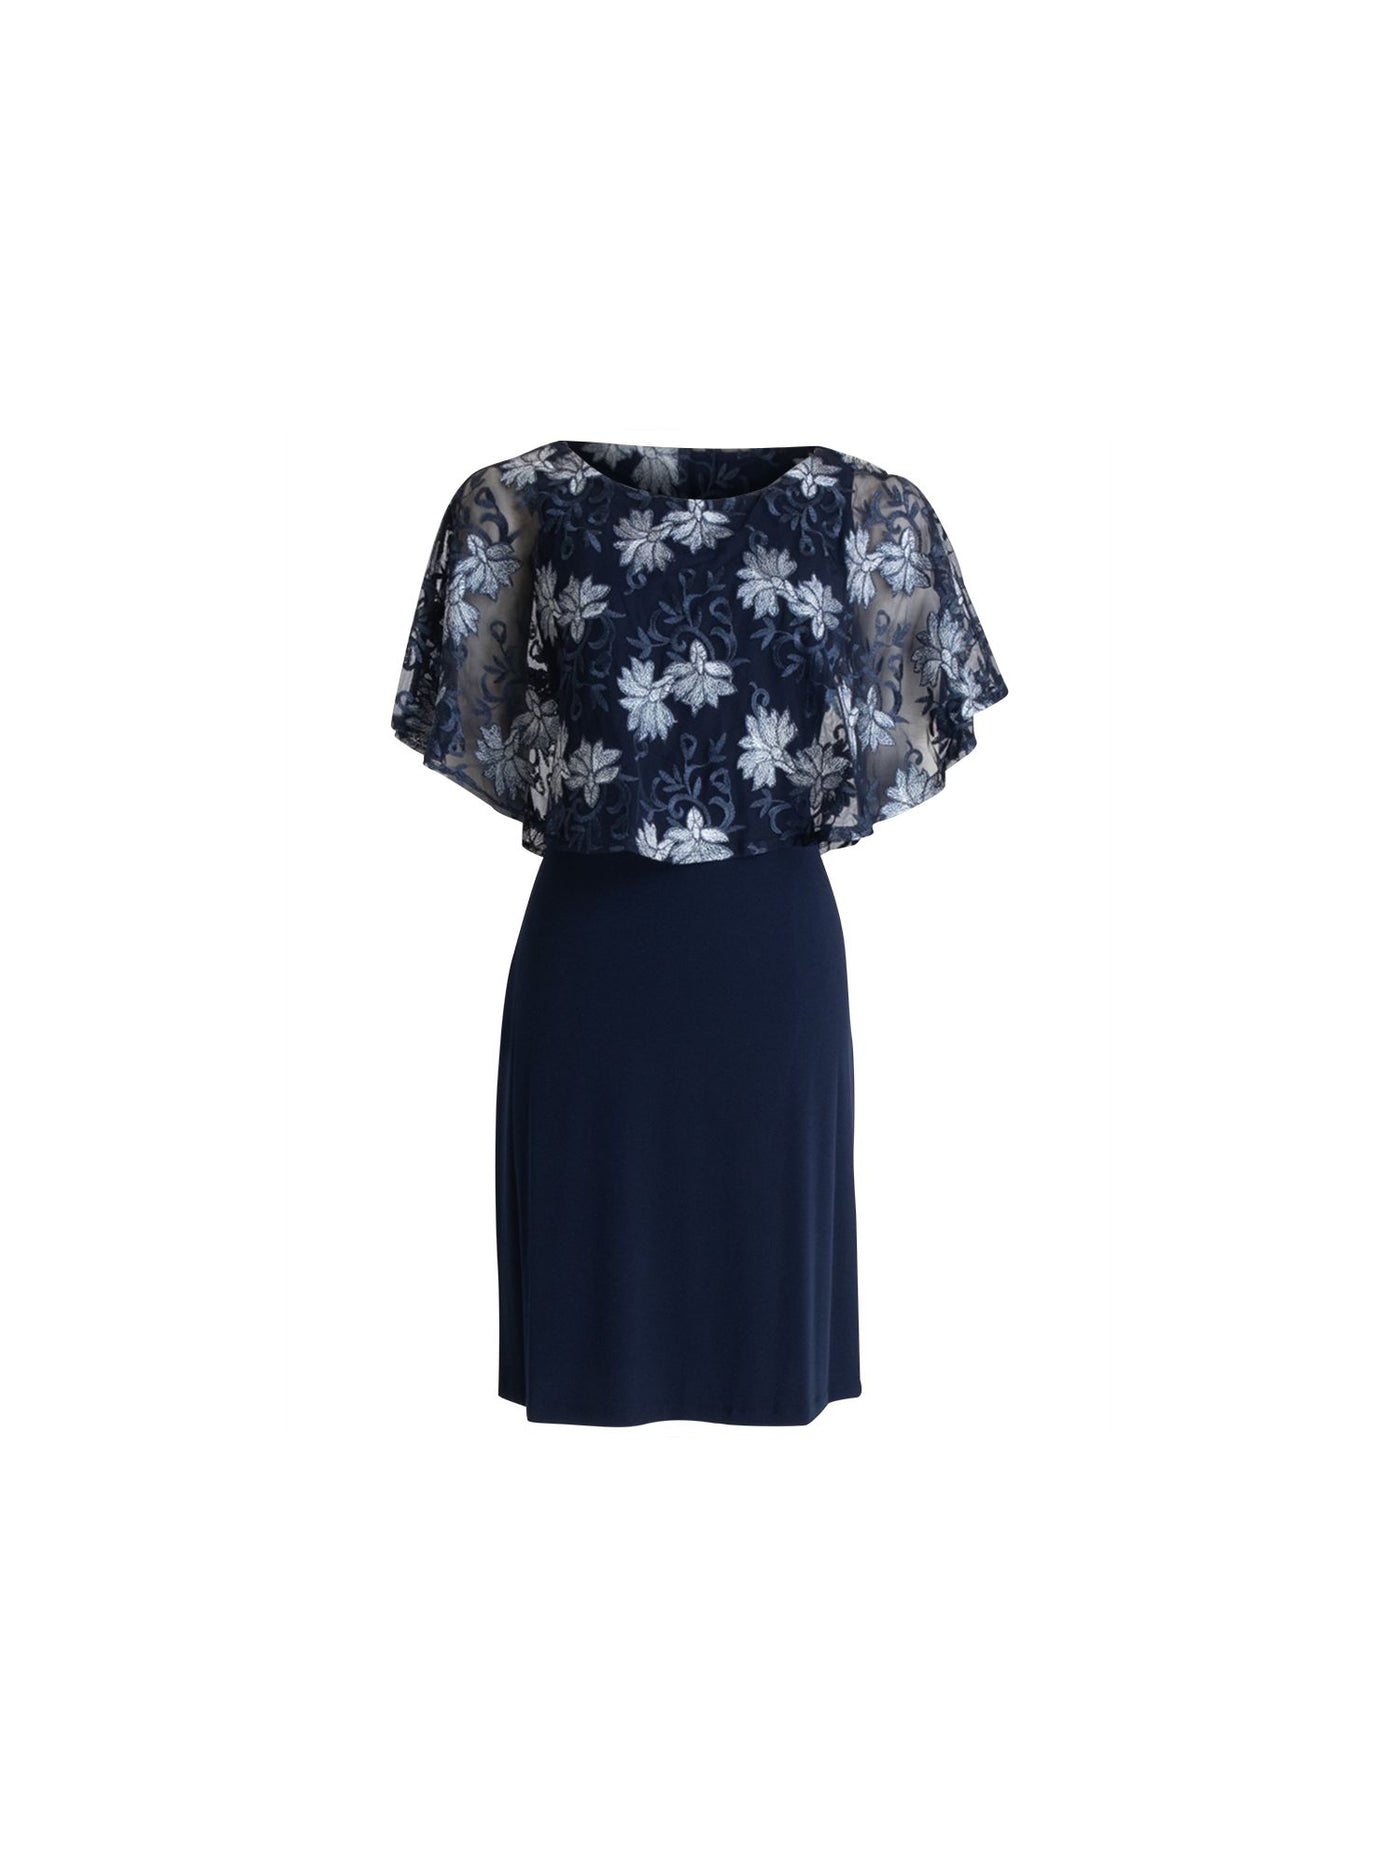 CONNECTED APPAREL Womens Navy Stretch Embroidered Popover Jersey-knit Floral Round Neck Above The Knee Evening Sheath Dress 22W